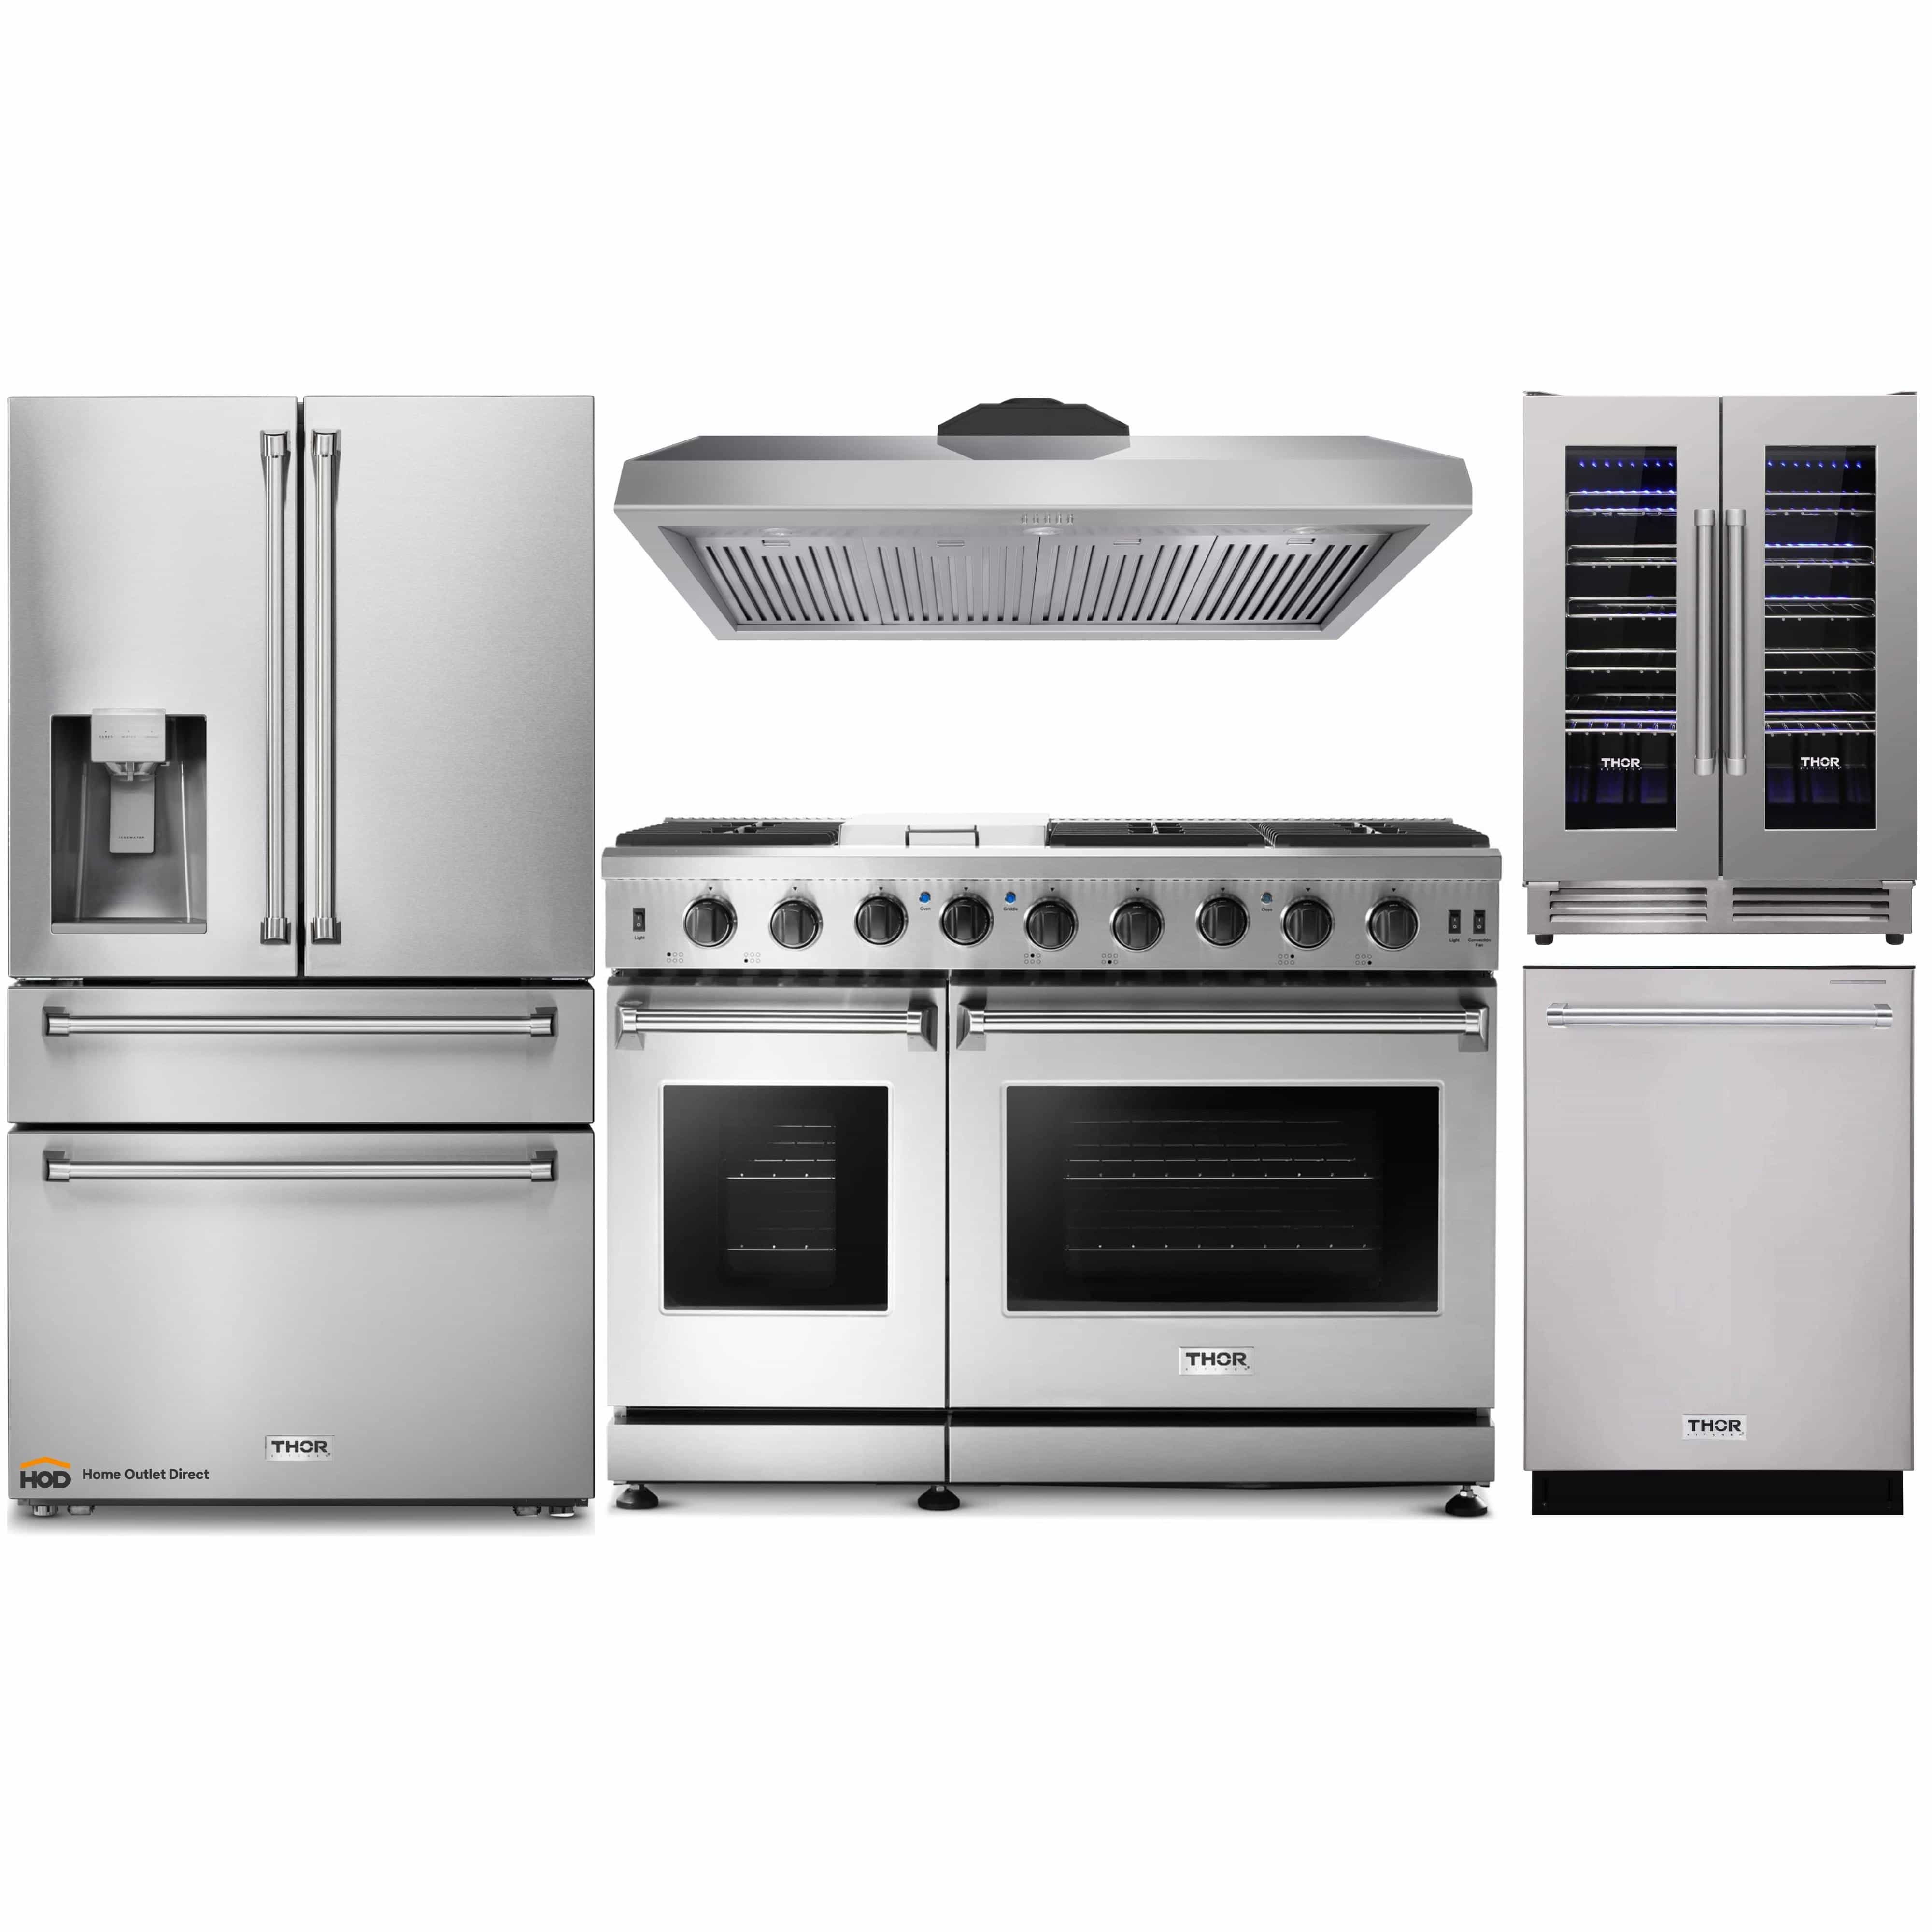 Thor Kitchen 5-Piece Appliance Package - 48-Inch Gas Range, Under Cabinet 11-Inch Tall Hood, Refrigerator with Water Dispenser, Dishwasher, & Wine Cooler in Stainless Steel